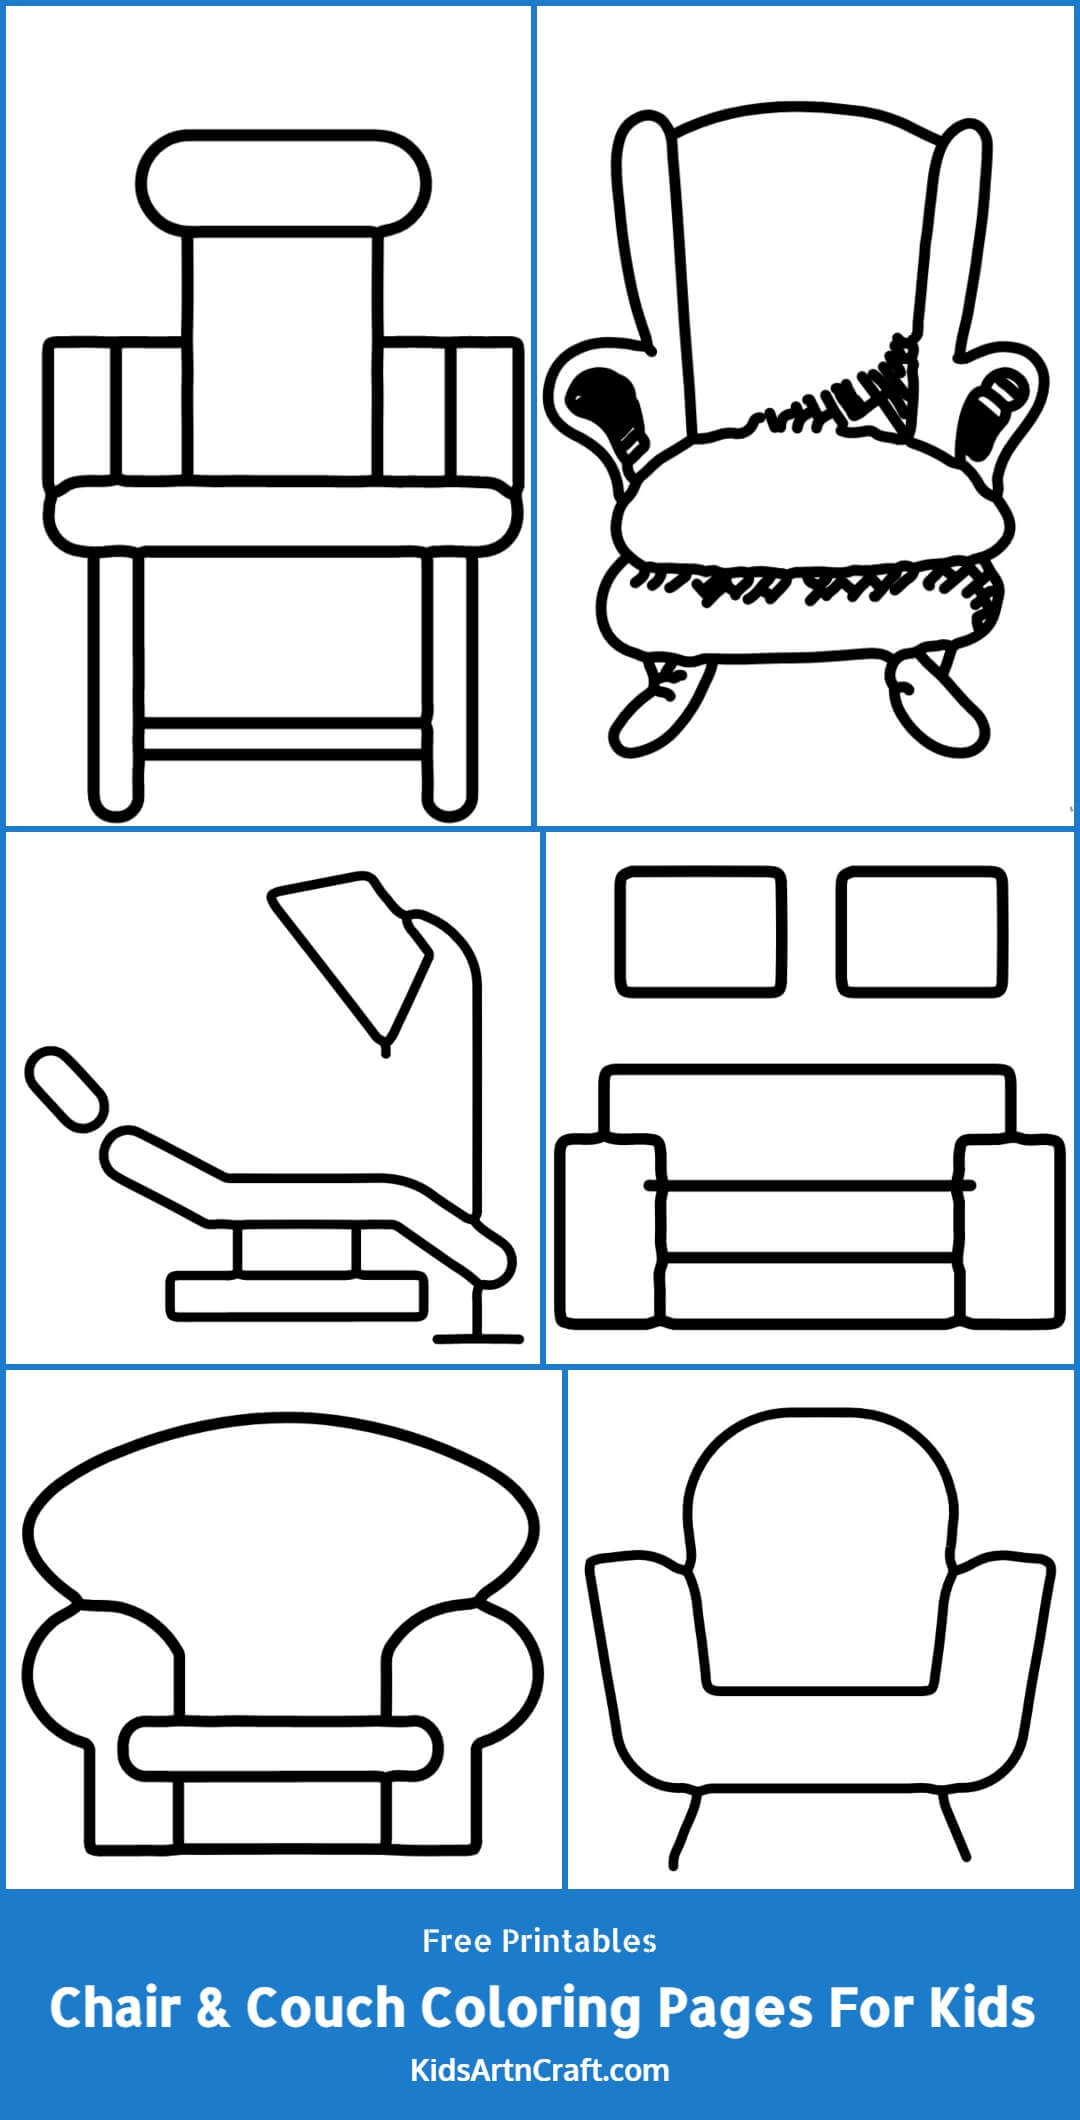 https://www.kidsartncraft.com/wp-content/uploads/2022/07/chair-couch-coloring-pages-for-kids-free-printables-Pinterest-story-coloring.jpg